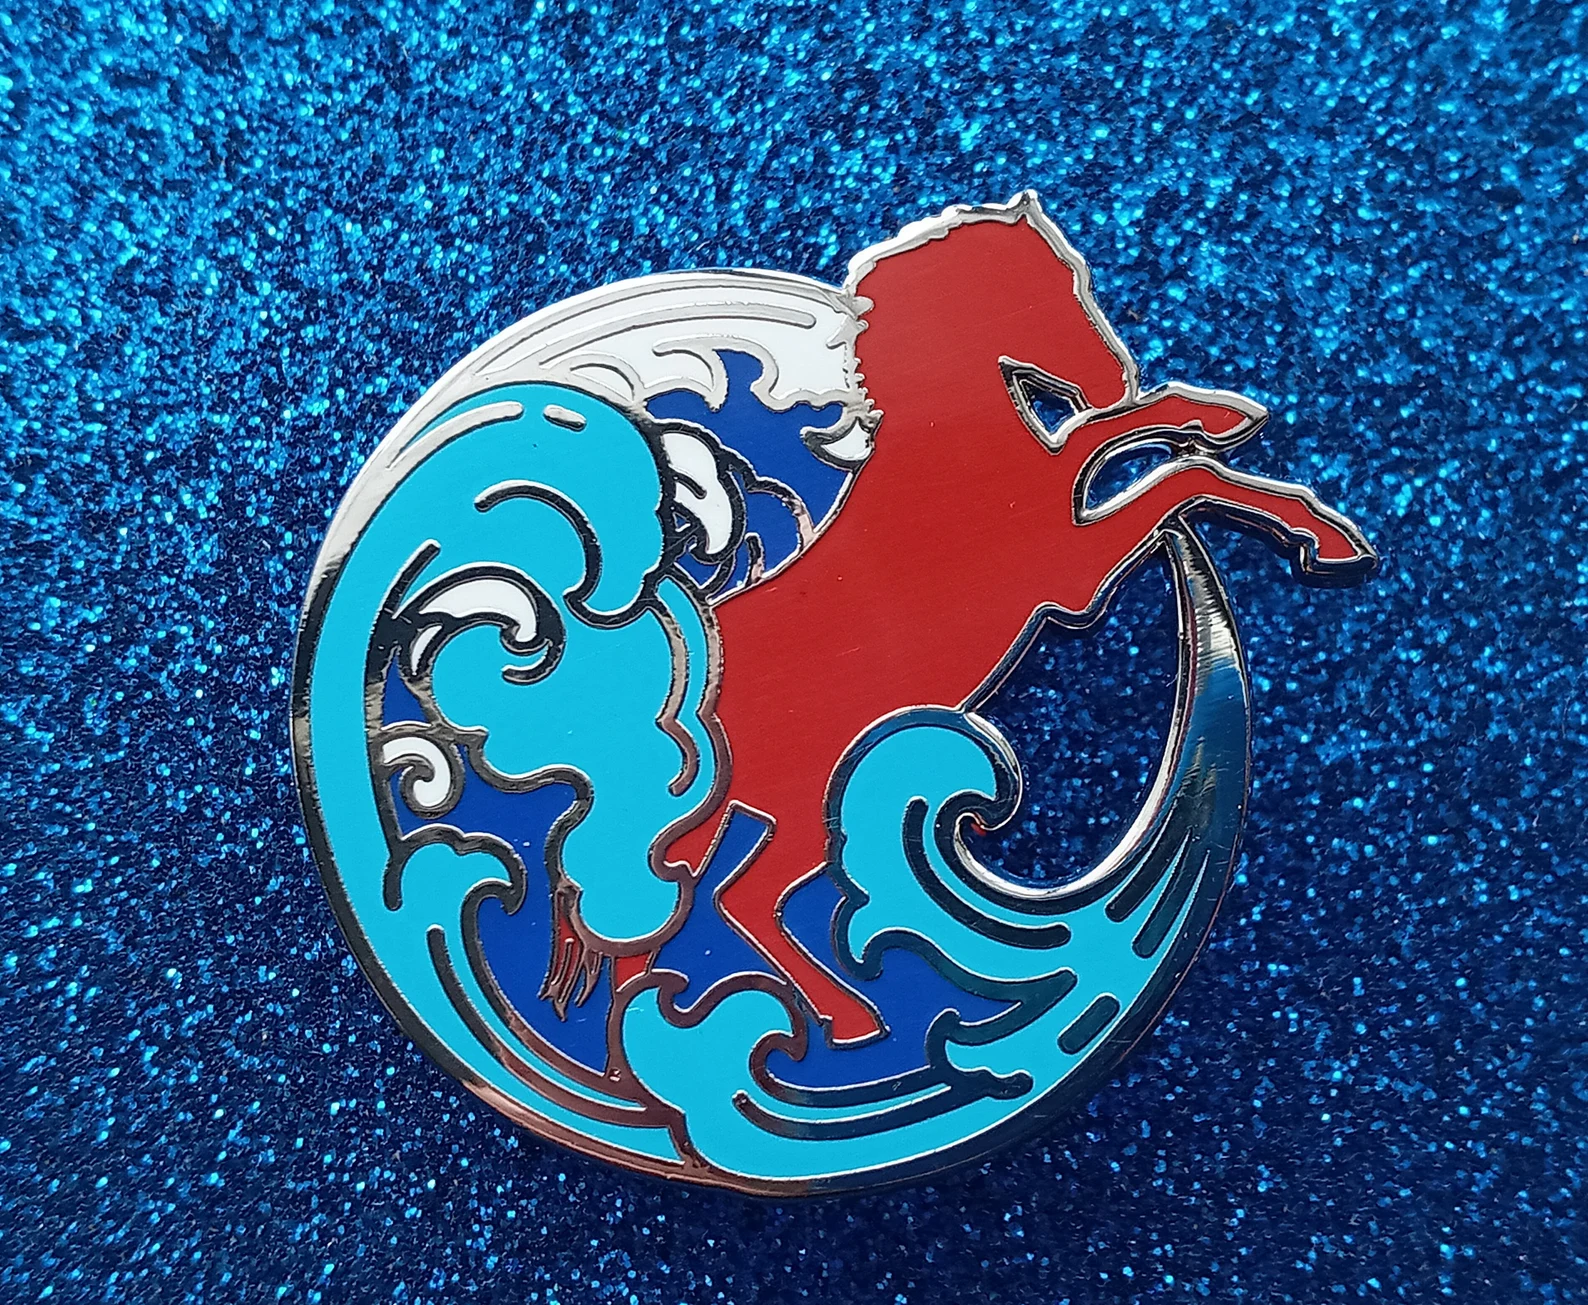 A round pin depicting blue waves and a red rearing horse